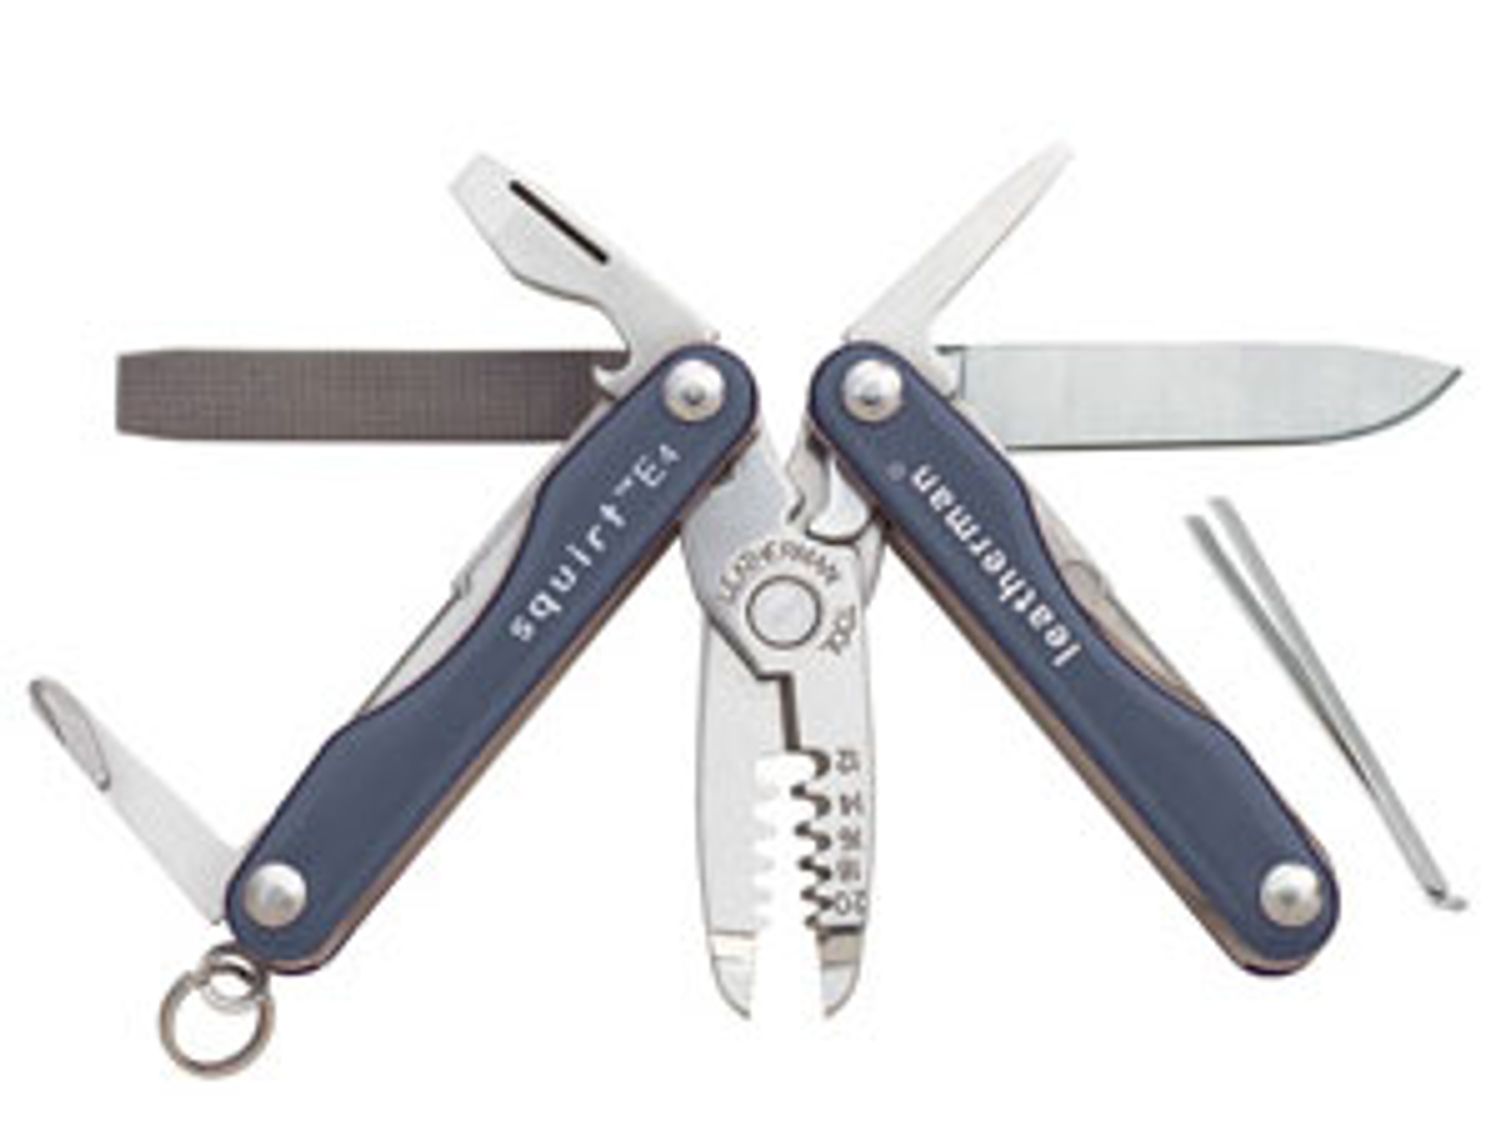 Leatherman Squirt E4 Electricians Key Ring Tool with Gray Handle